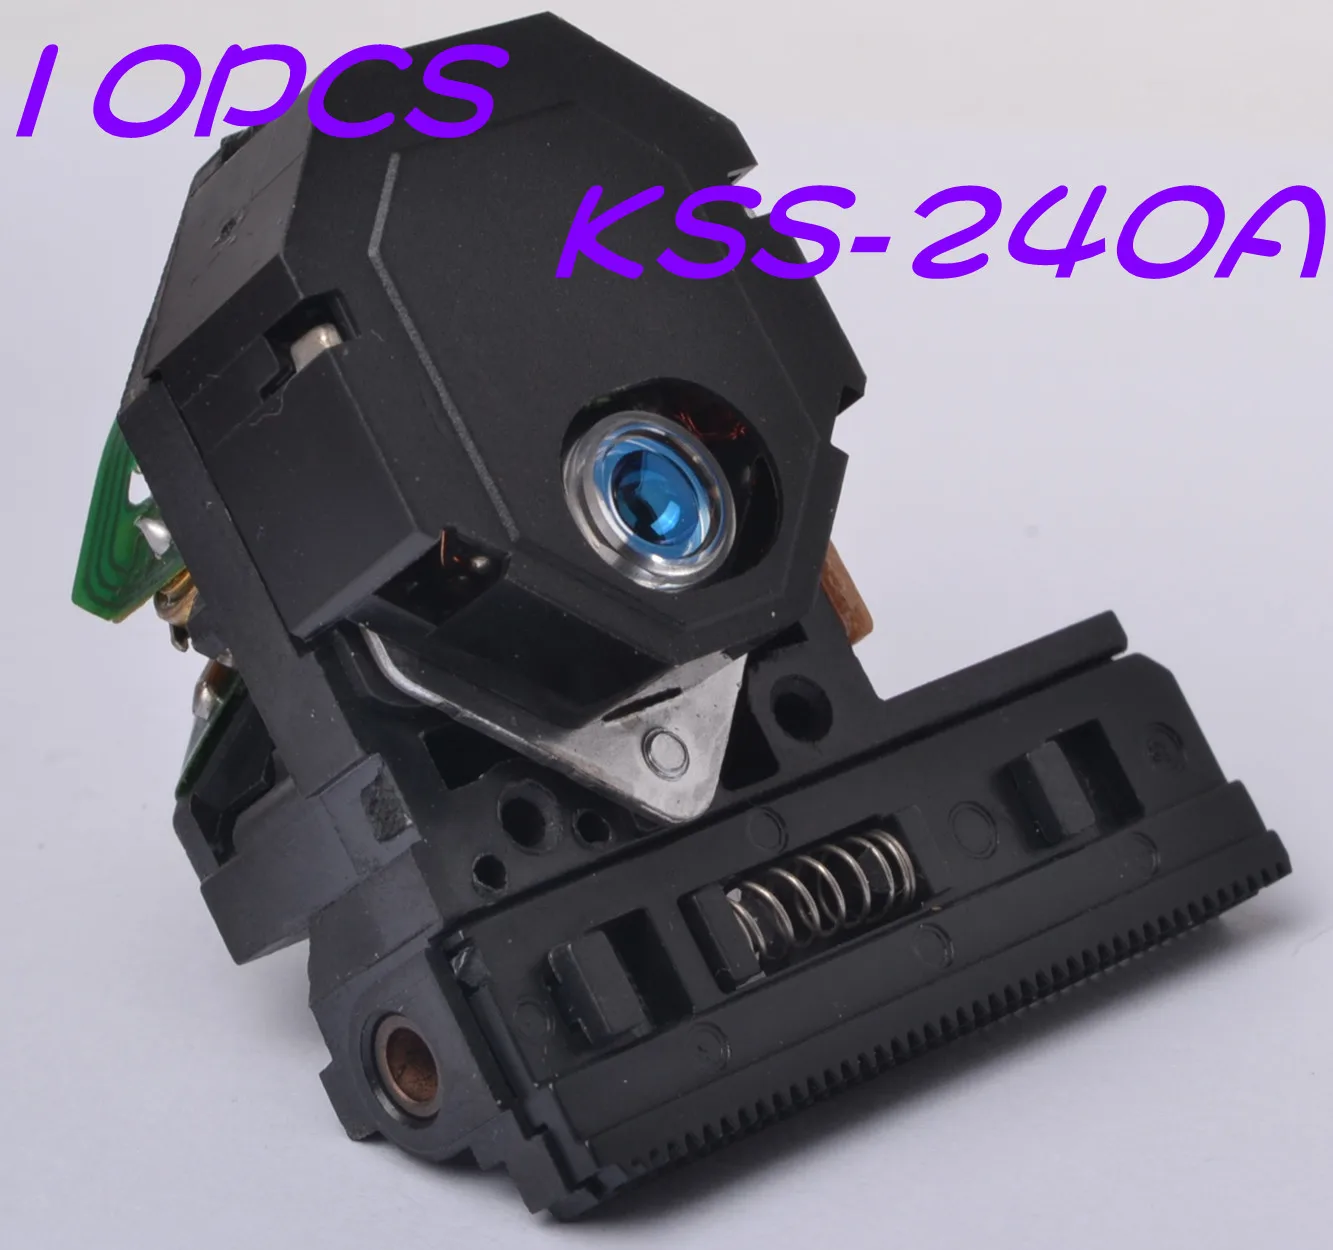 

10PCS KSS-240A KSS-240 KSS240A Radio Blu-Rays CD Player Lasers-Lens Optical Pick-Ups For Sony Lasers-Head